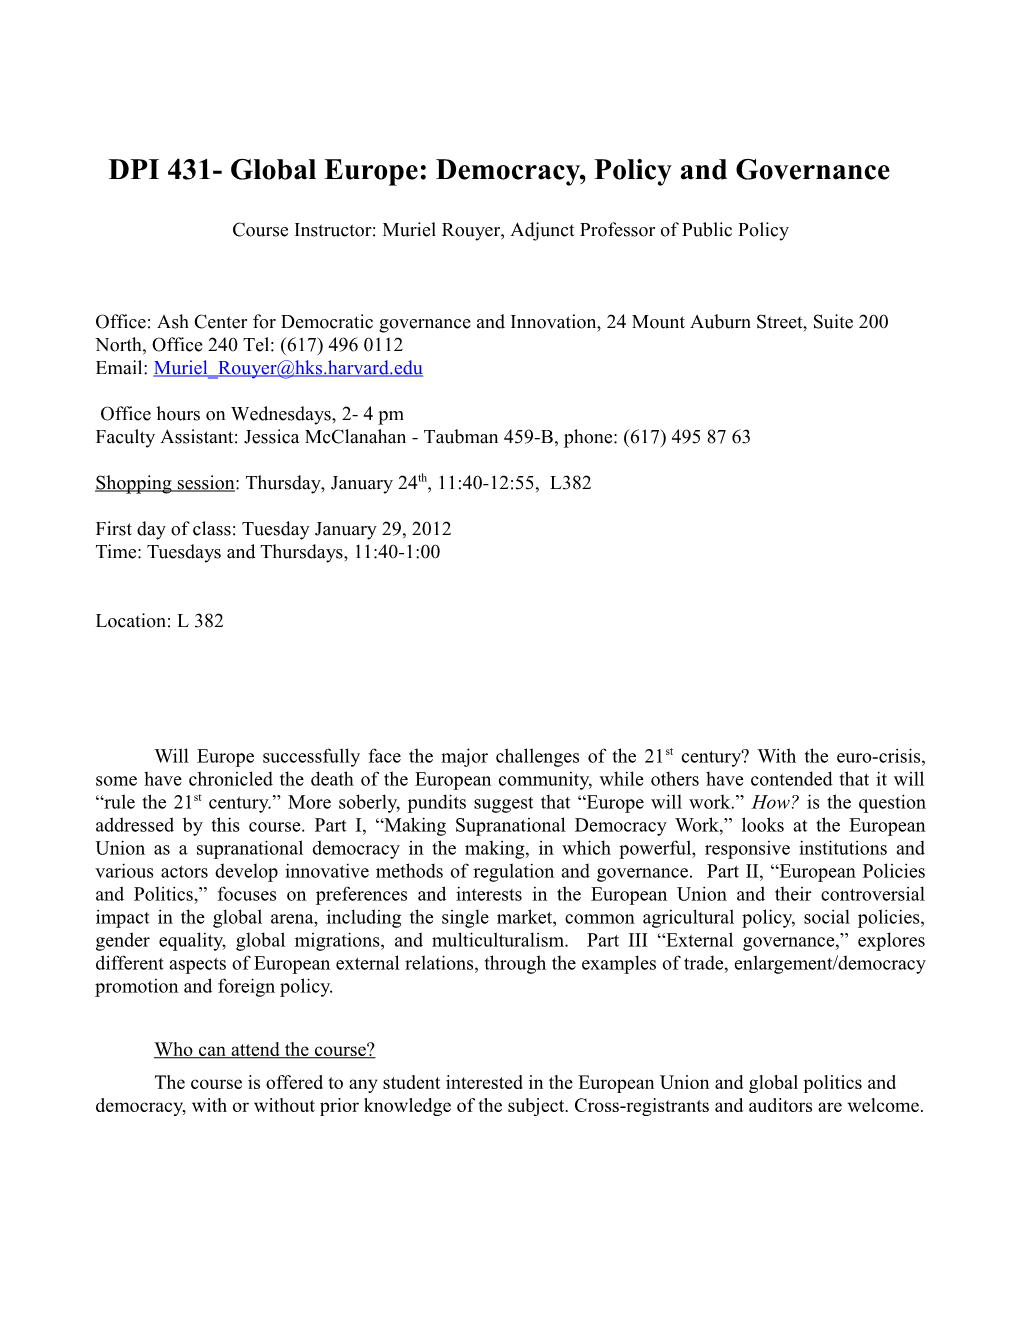 DPI 431- Global Europe: Democracy, Policy and Governance